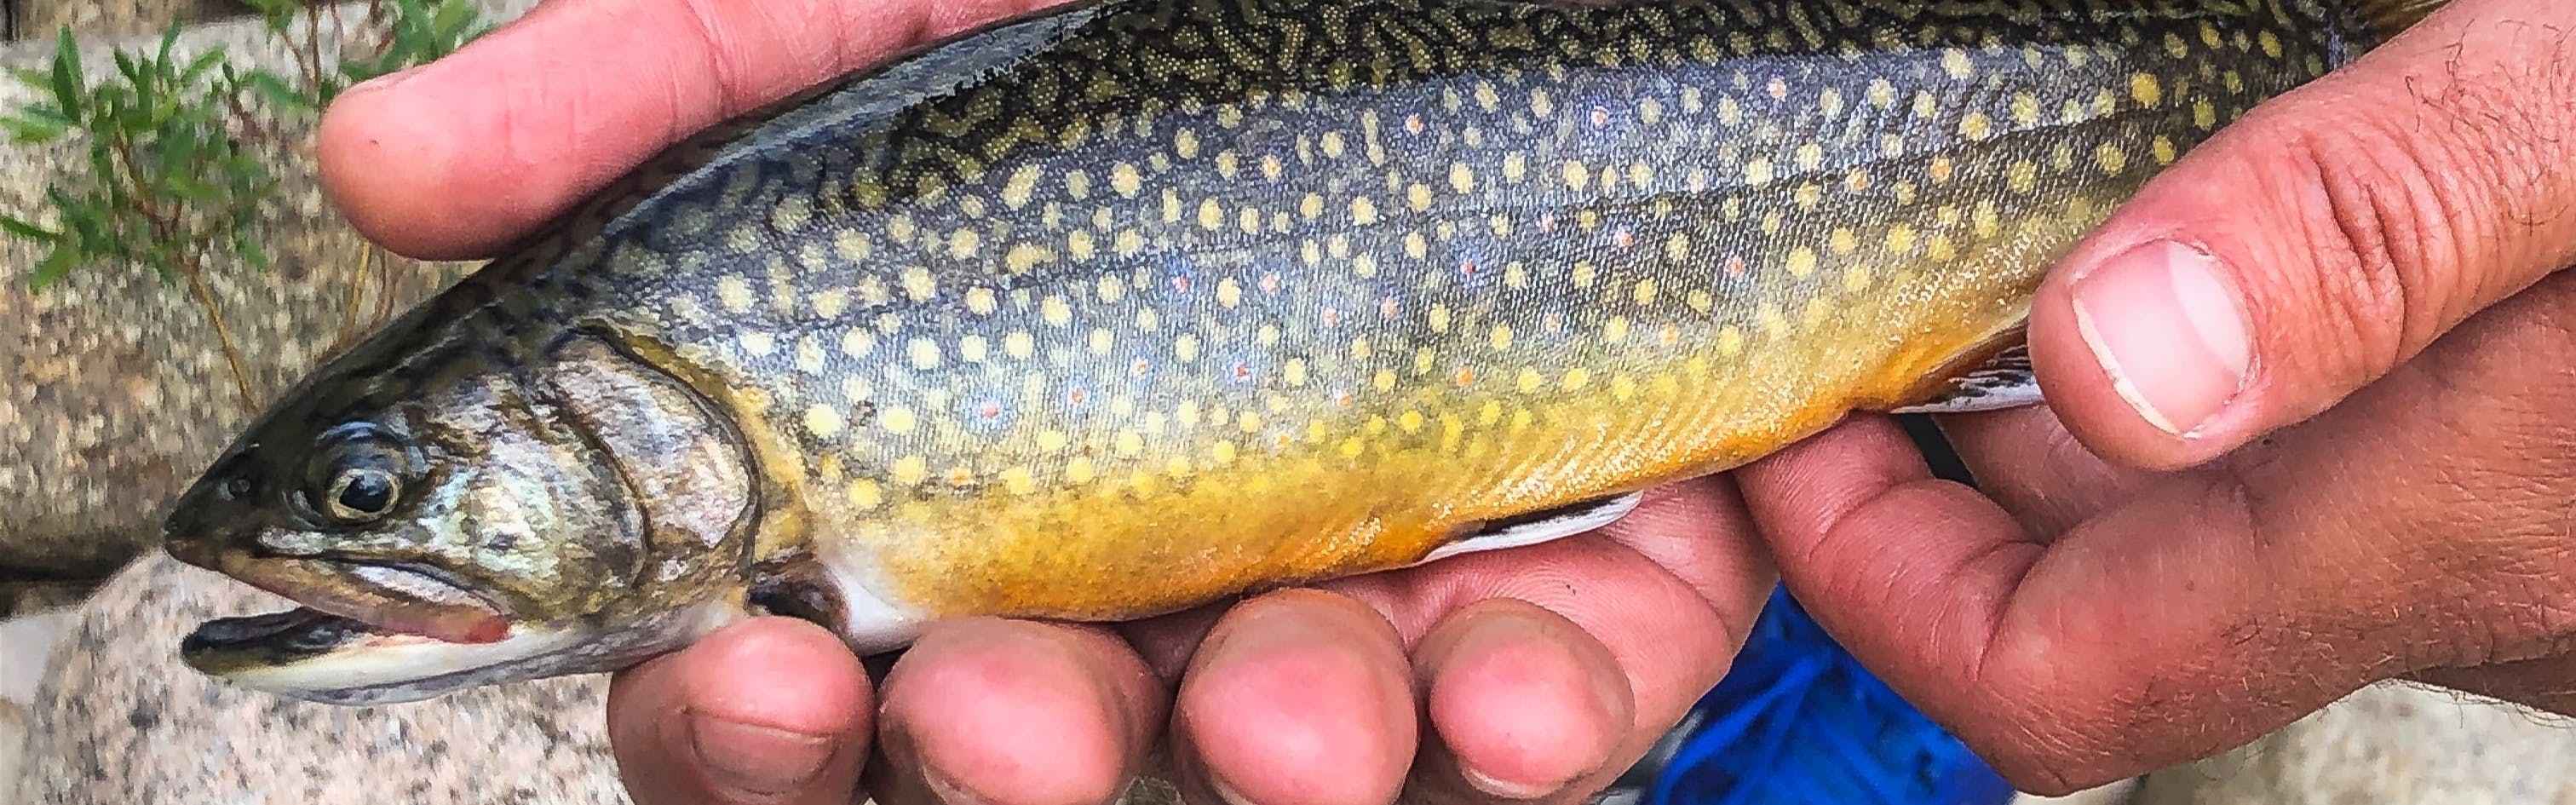 Fly Fishing in Pennsylvania: Tips for a Successful Fishing Day in